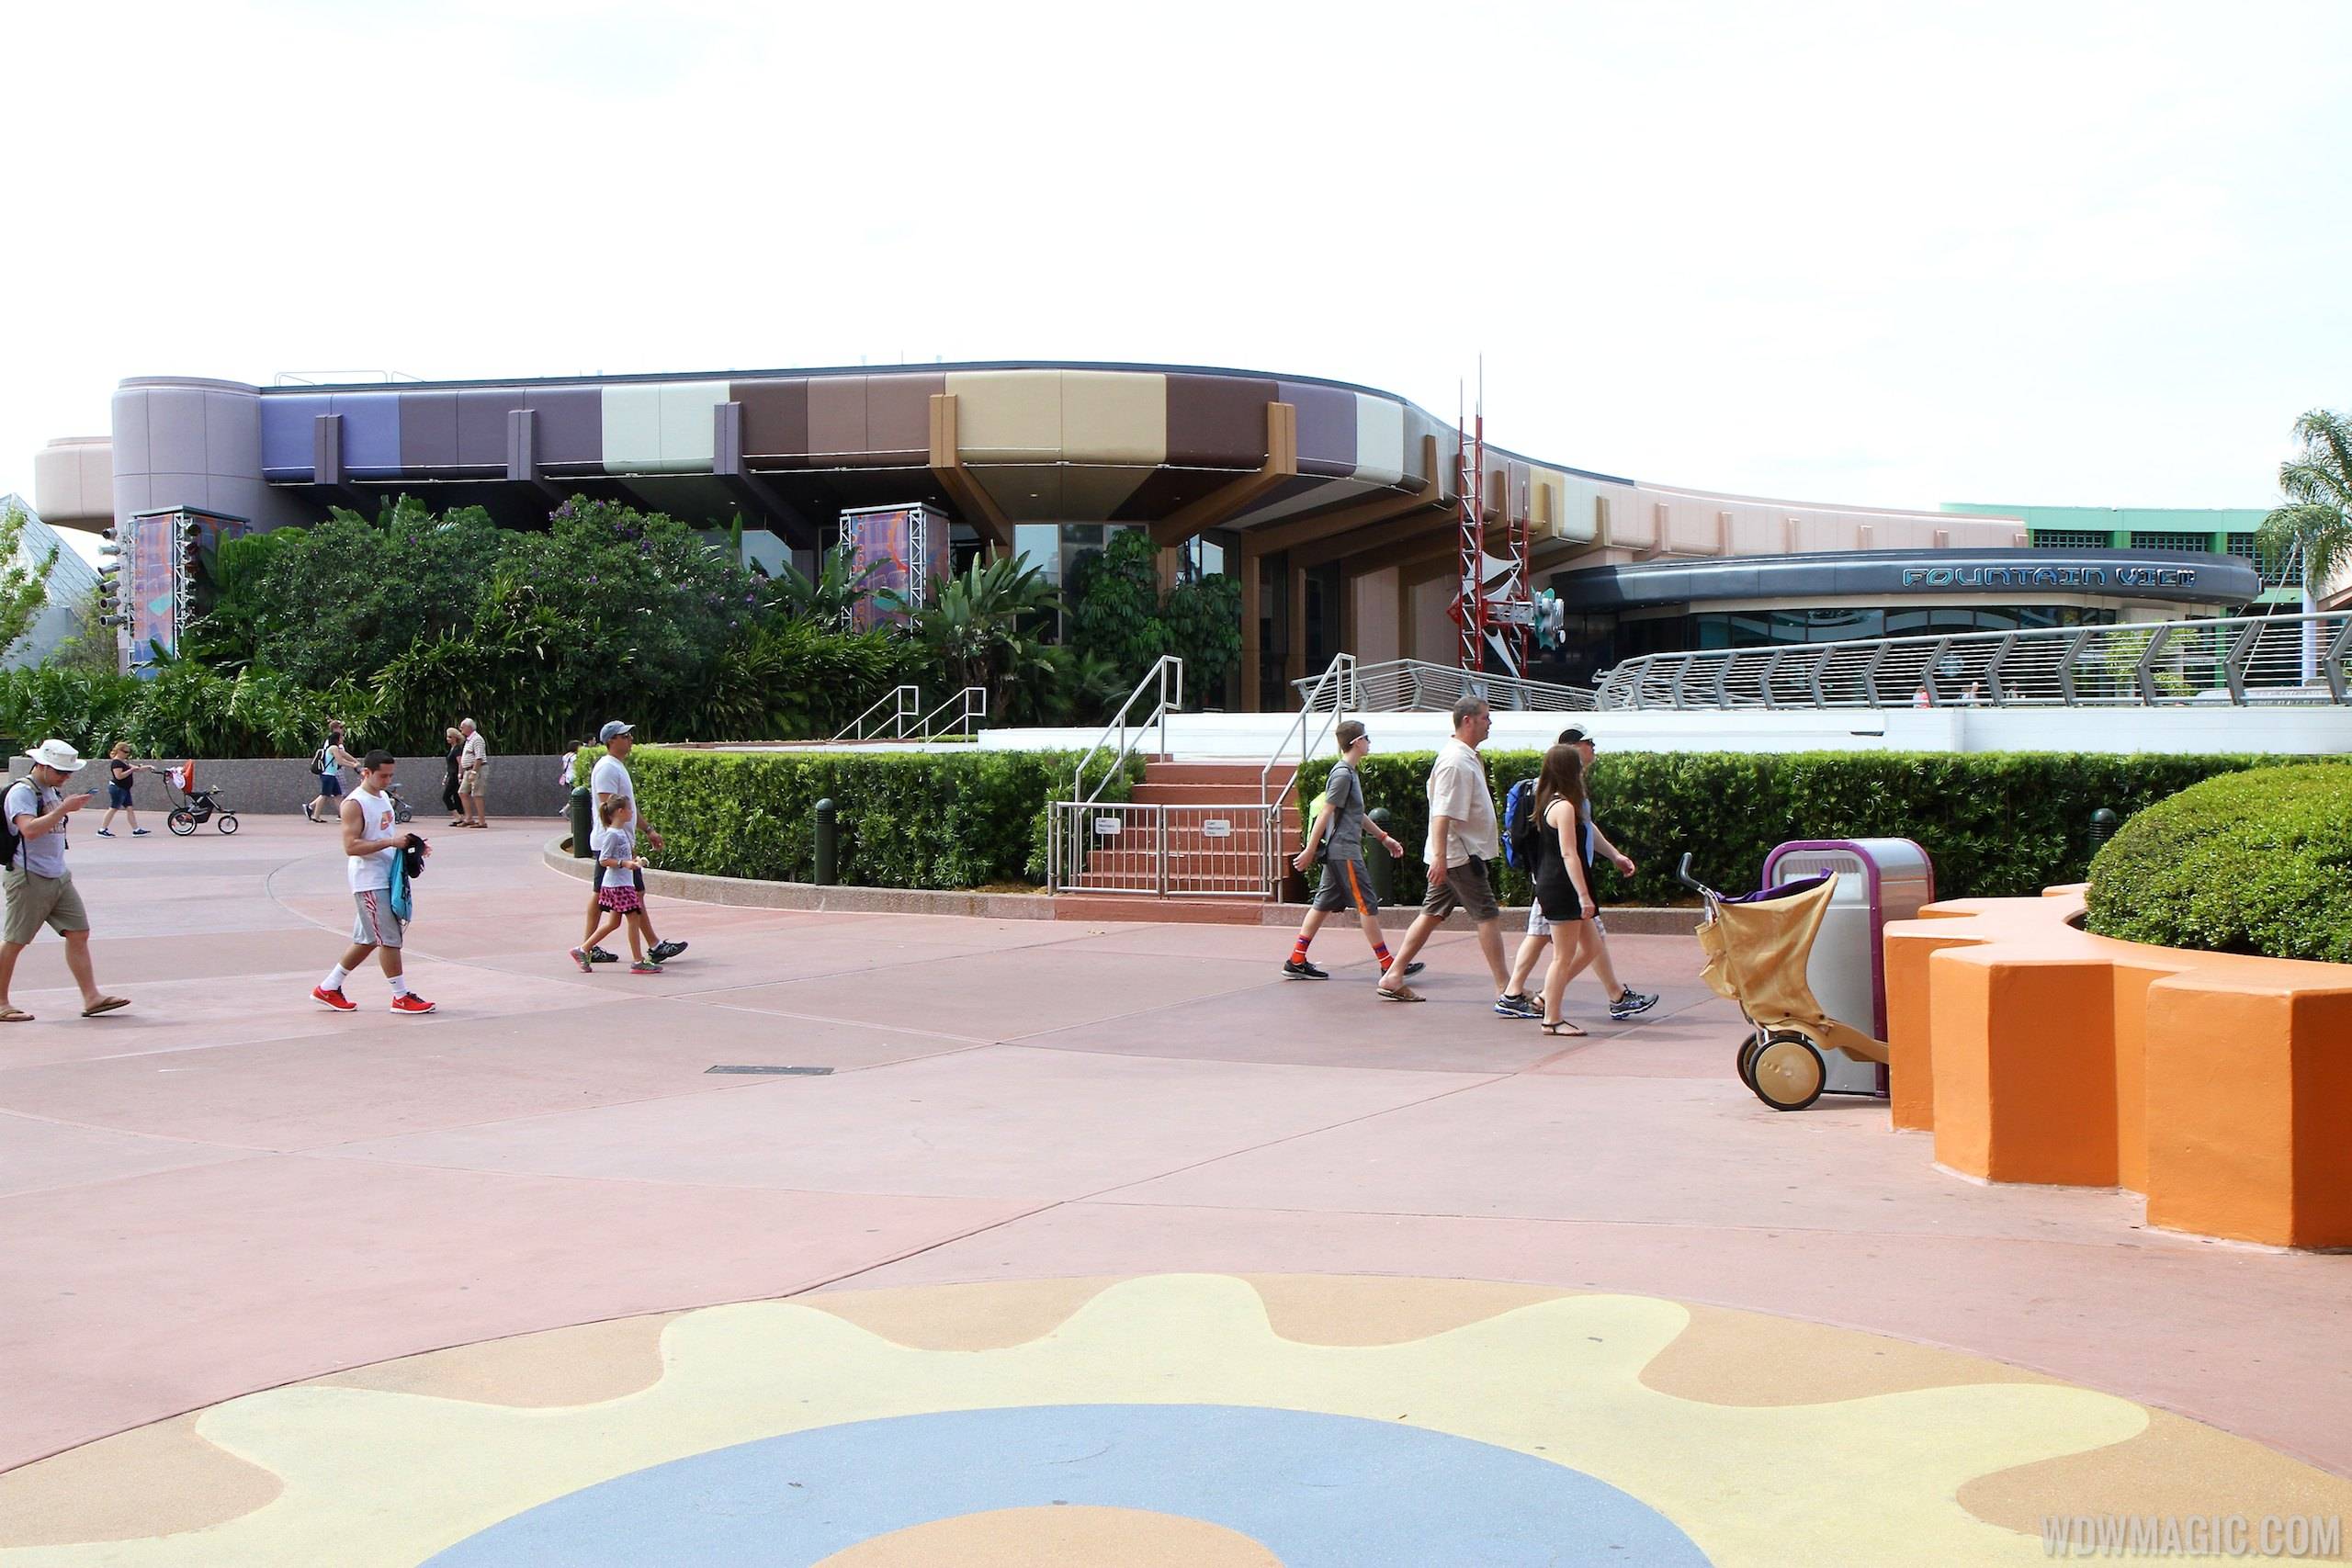 PHOTOS - New paint scheme for the Communicore buildings at Epcot nears half-way complete